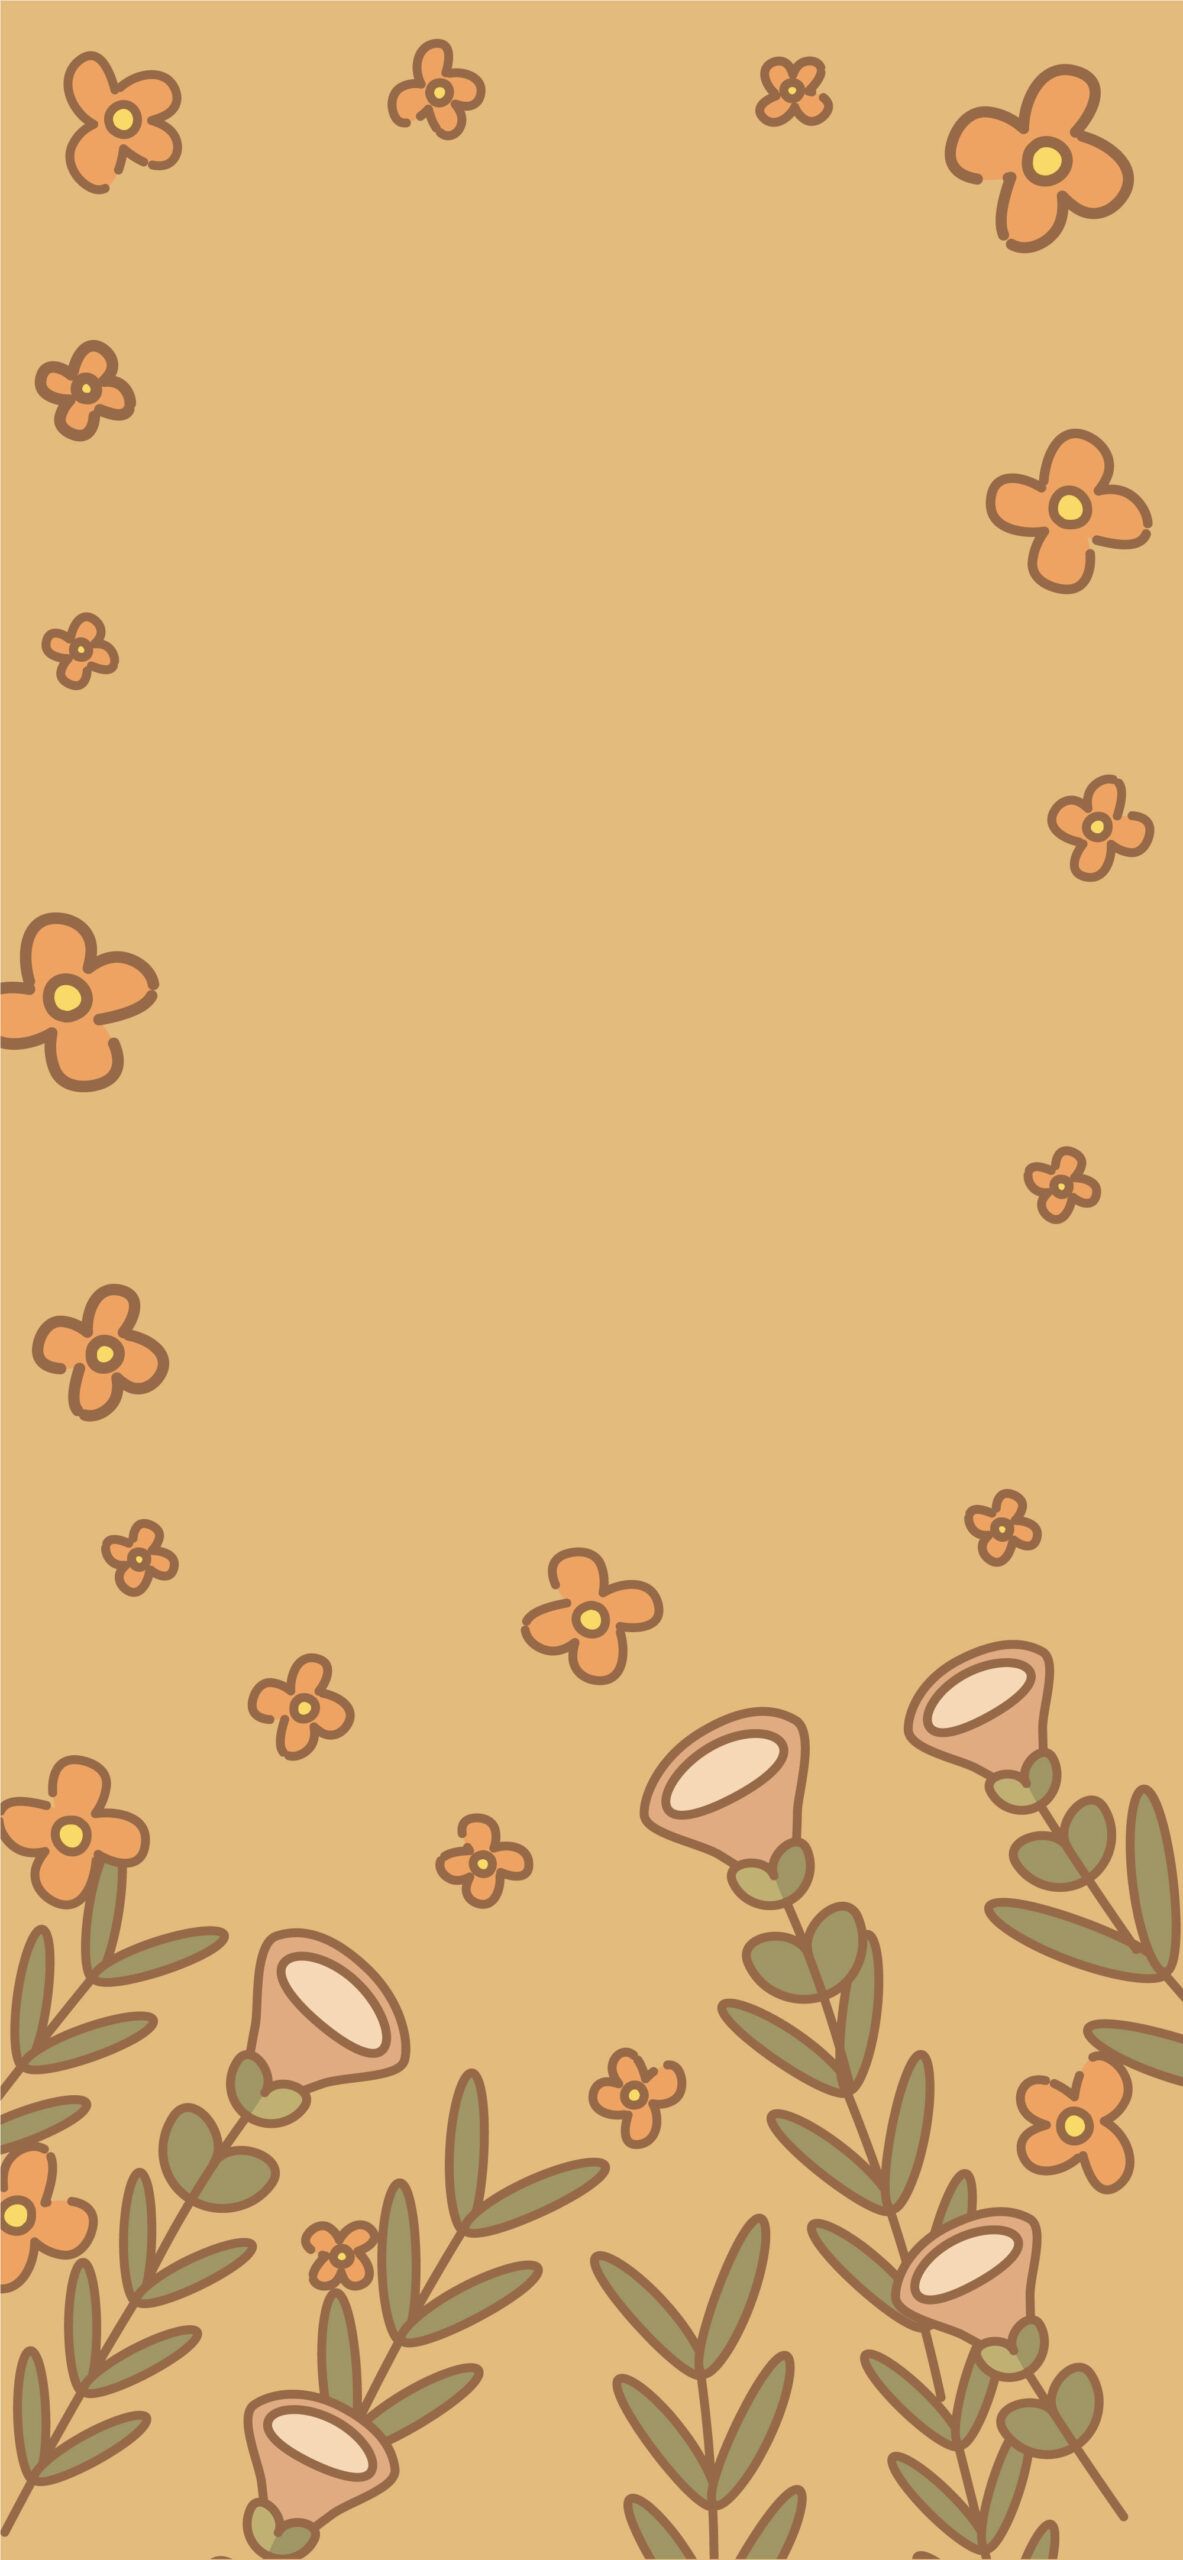 Aesthetic phone background with flowers and a brown background - Cute, cottagecore, pretty